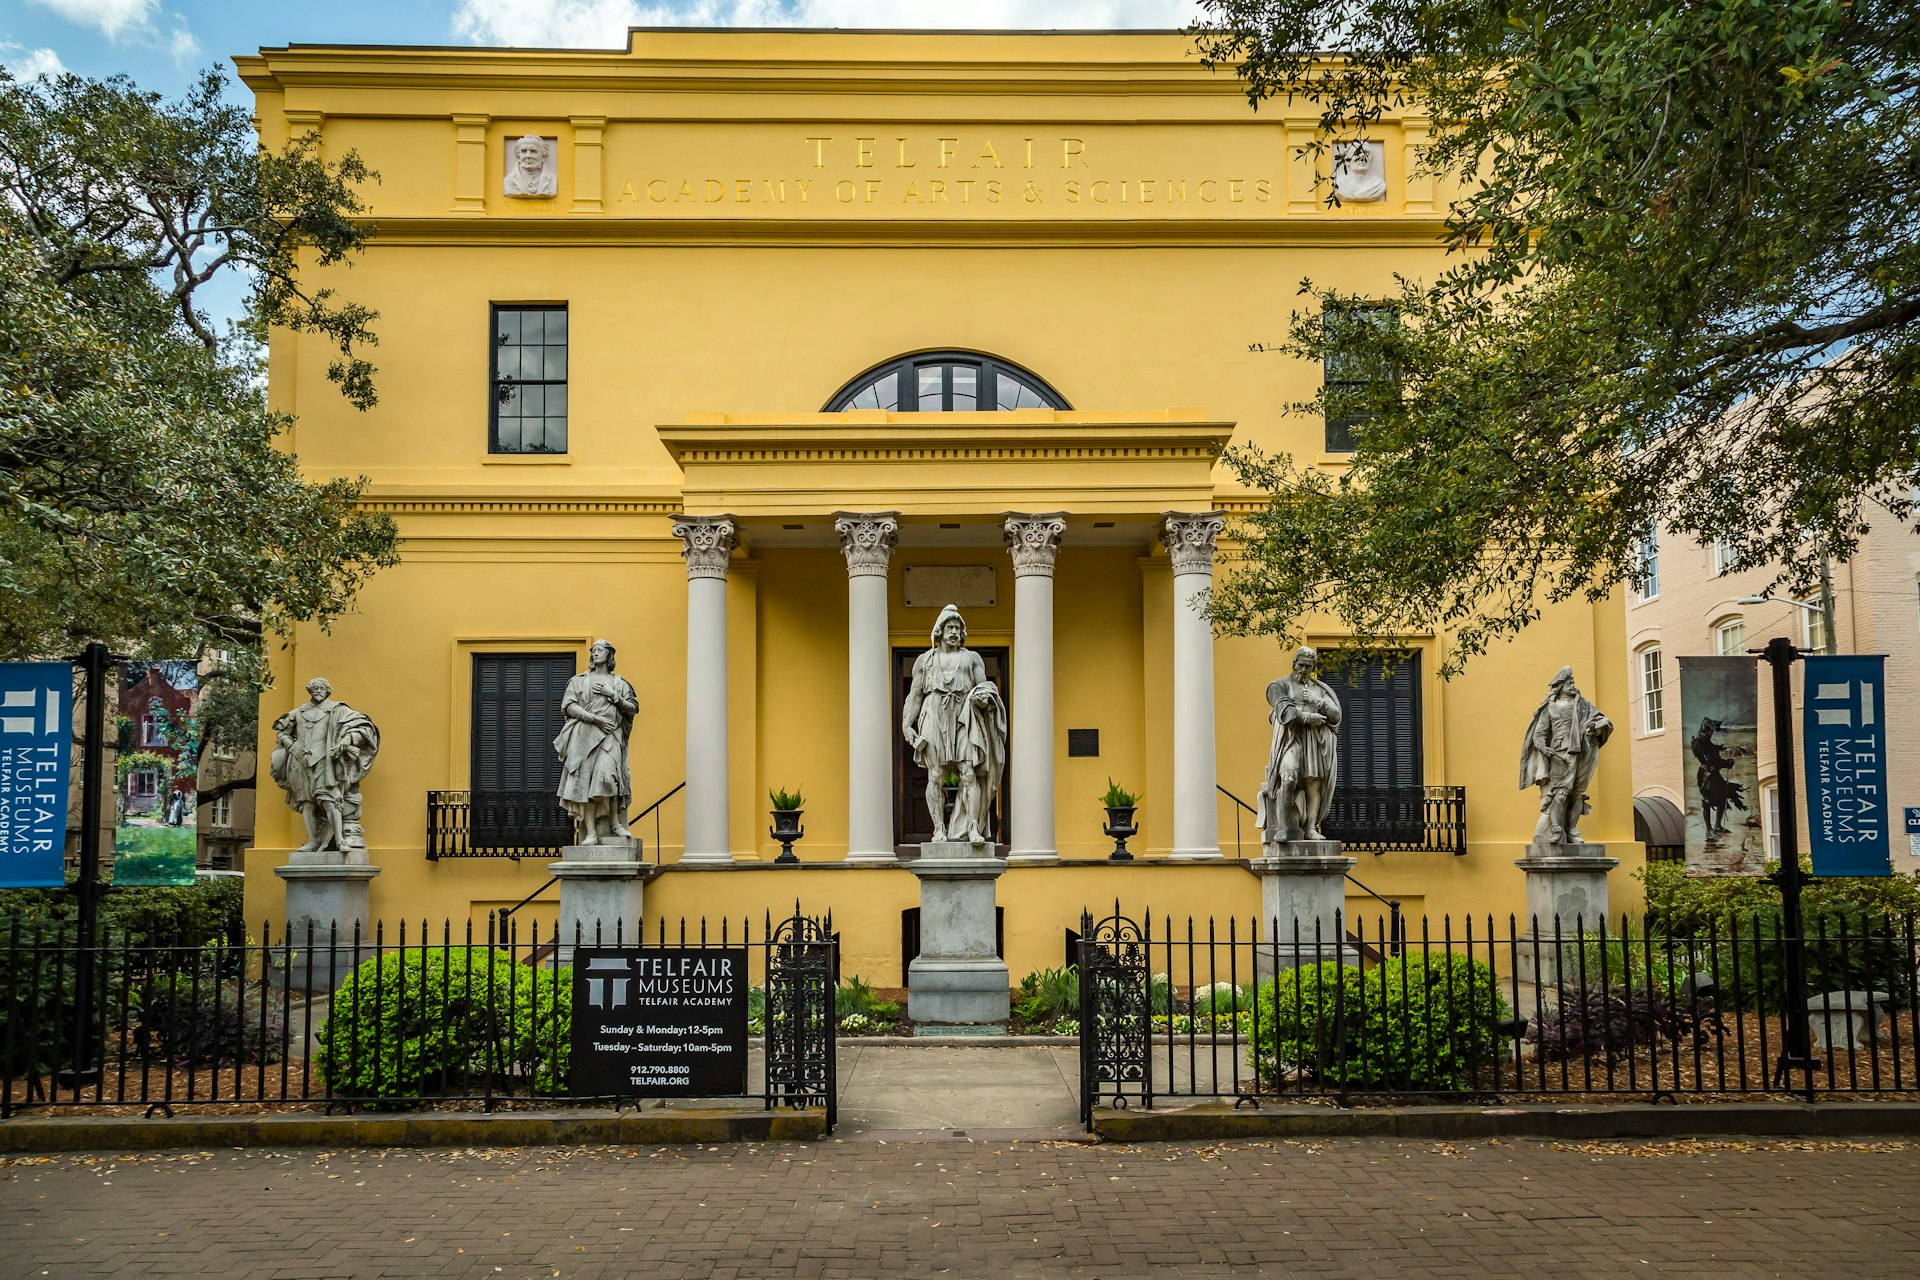 The facade of the yellow Telfair Academy, a historic mansion and museum